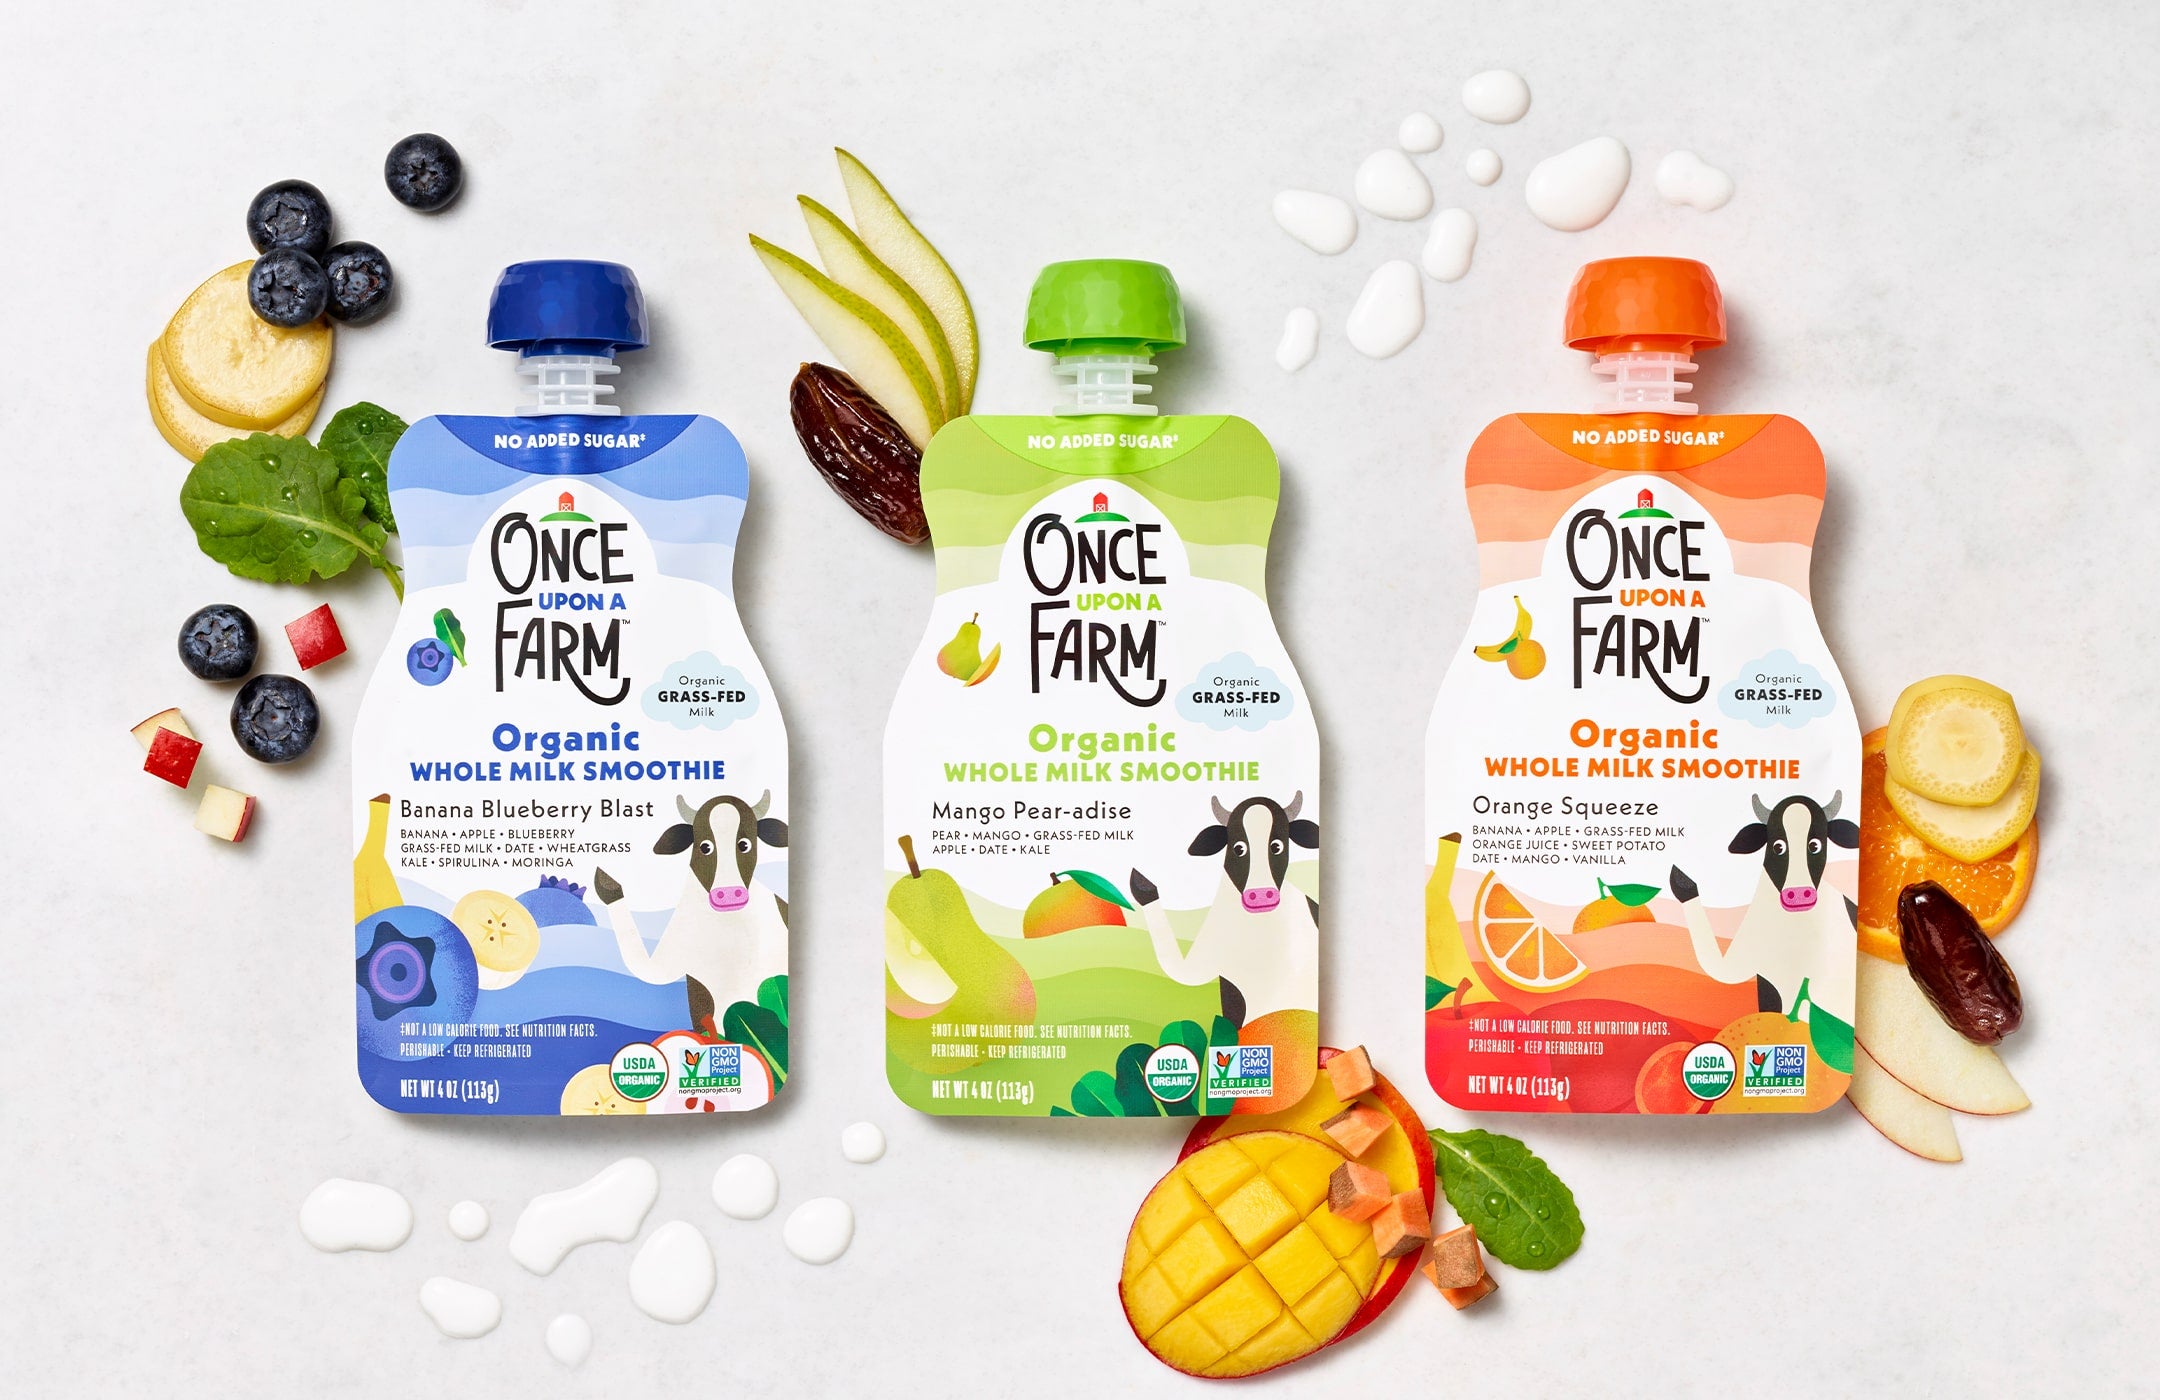 Meet Our New Whole Milk Smoothies